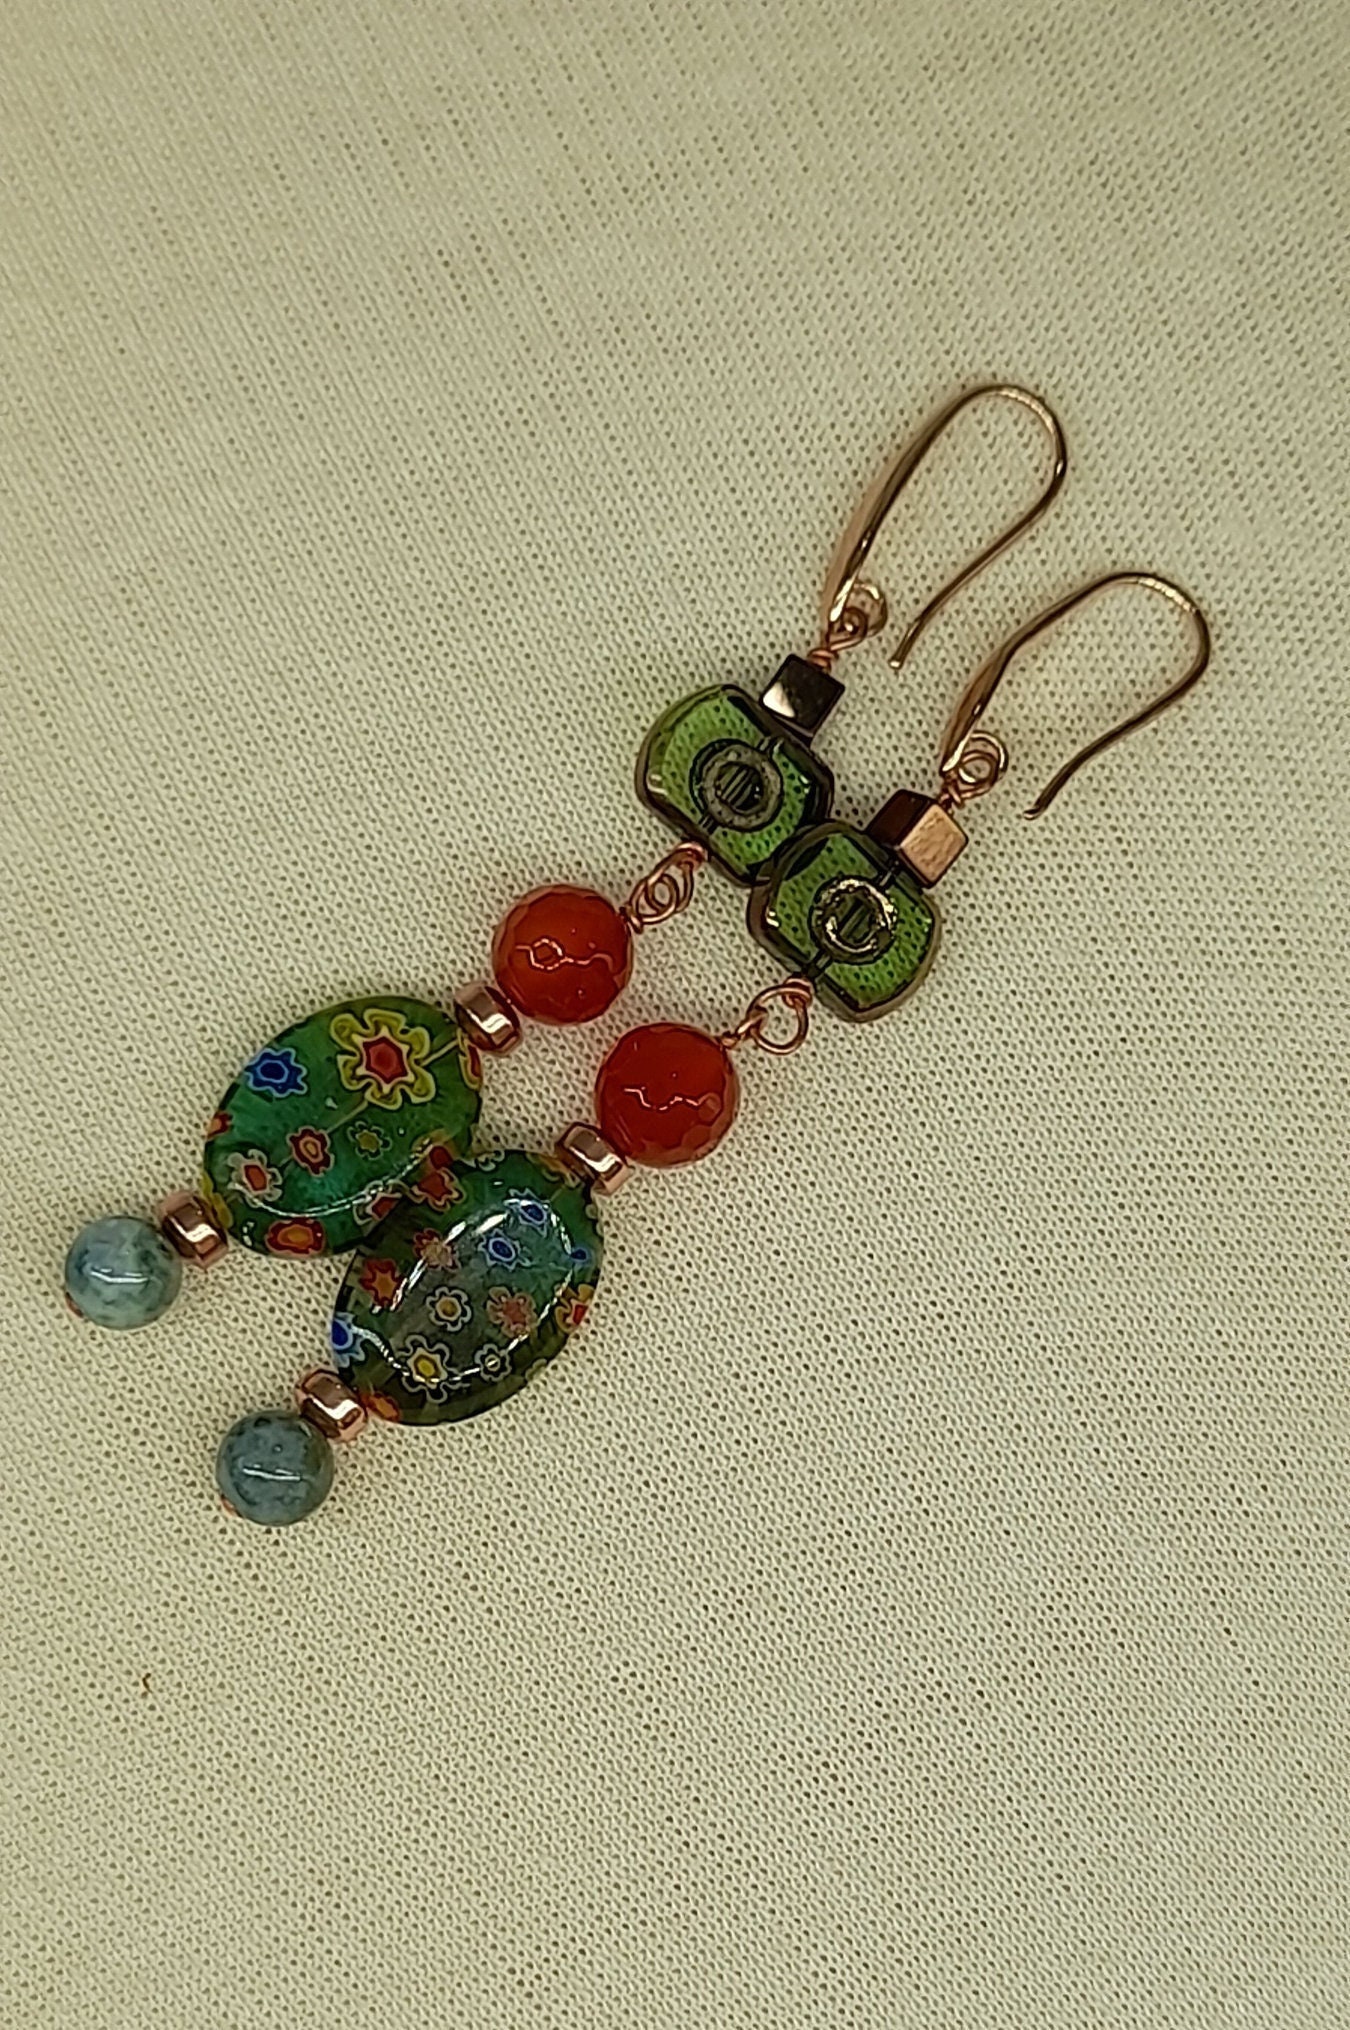 Long Dangle Brass Earrings, Millefiori Lamp Work Beads, Red Agate,  Hematite, Green African Turquoise, Bronze Plated Glass 